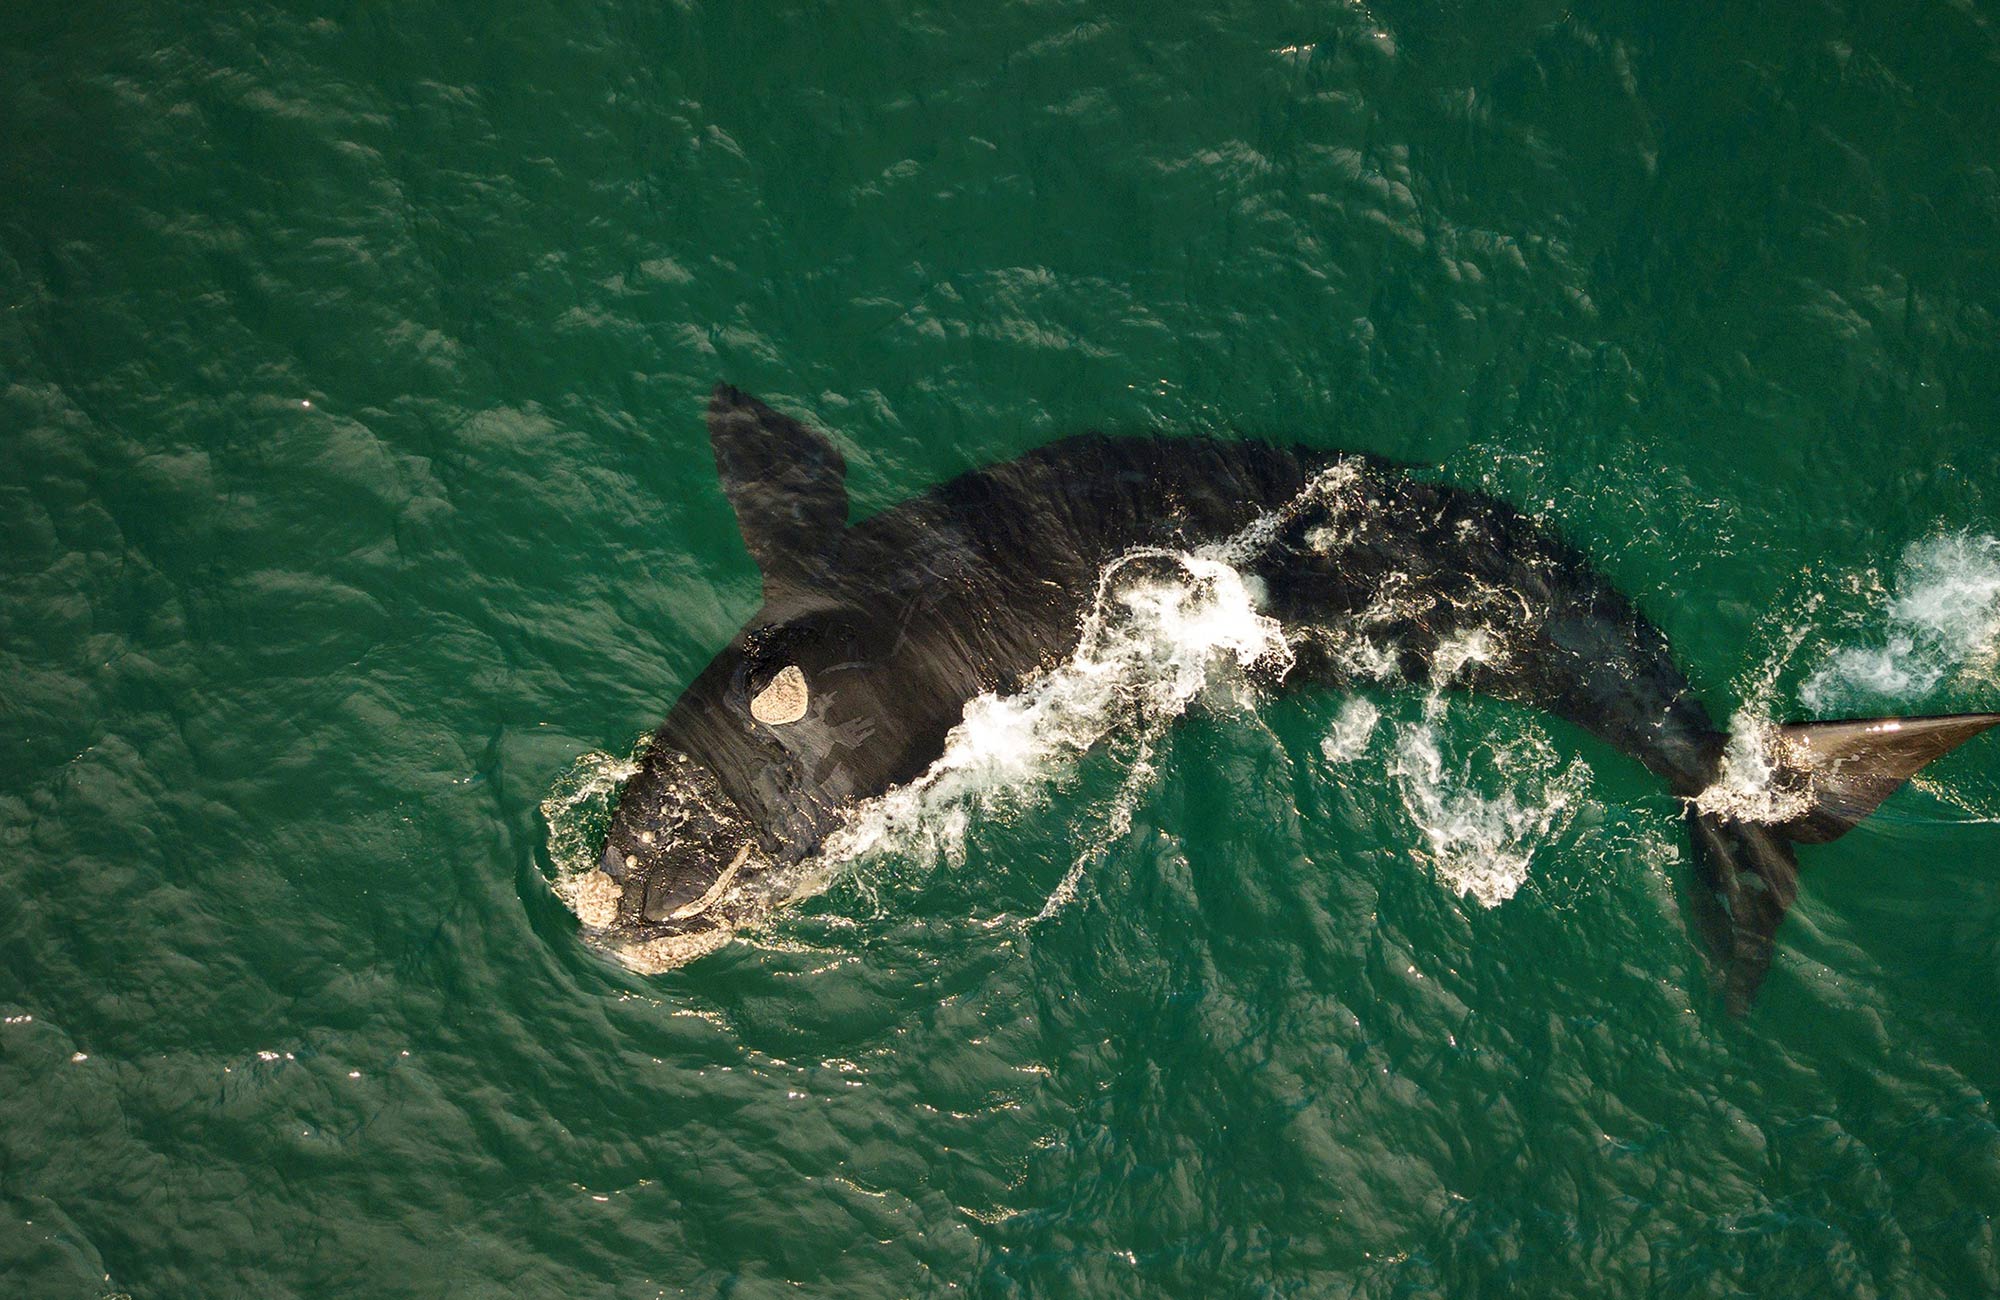 Aerial view of a Southern right whale surfacing the water. Photo: Lachlan Hall &copy: Lachlan Hall